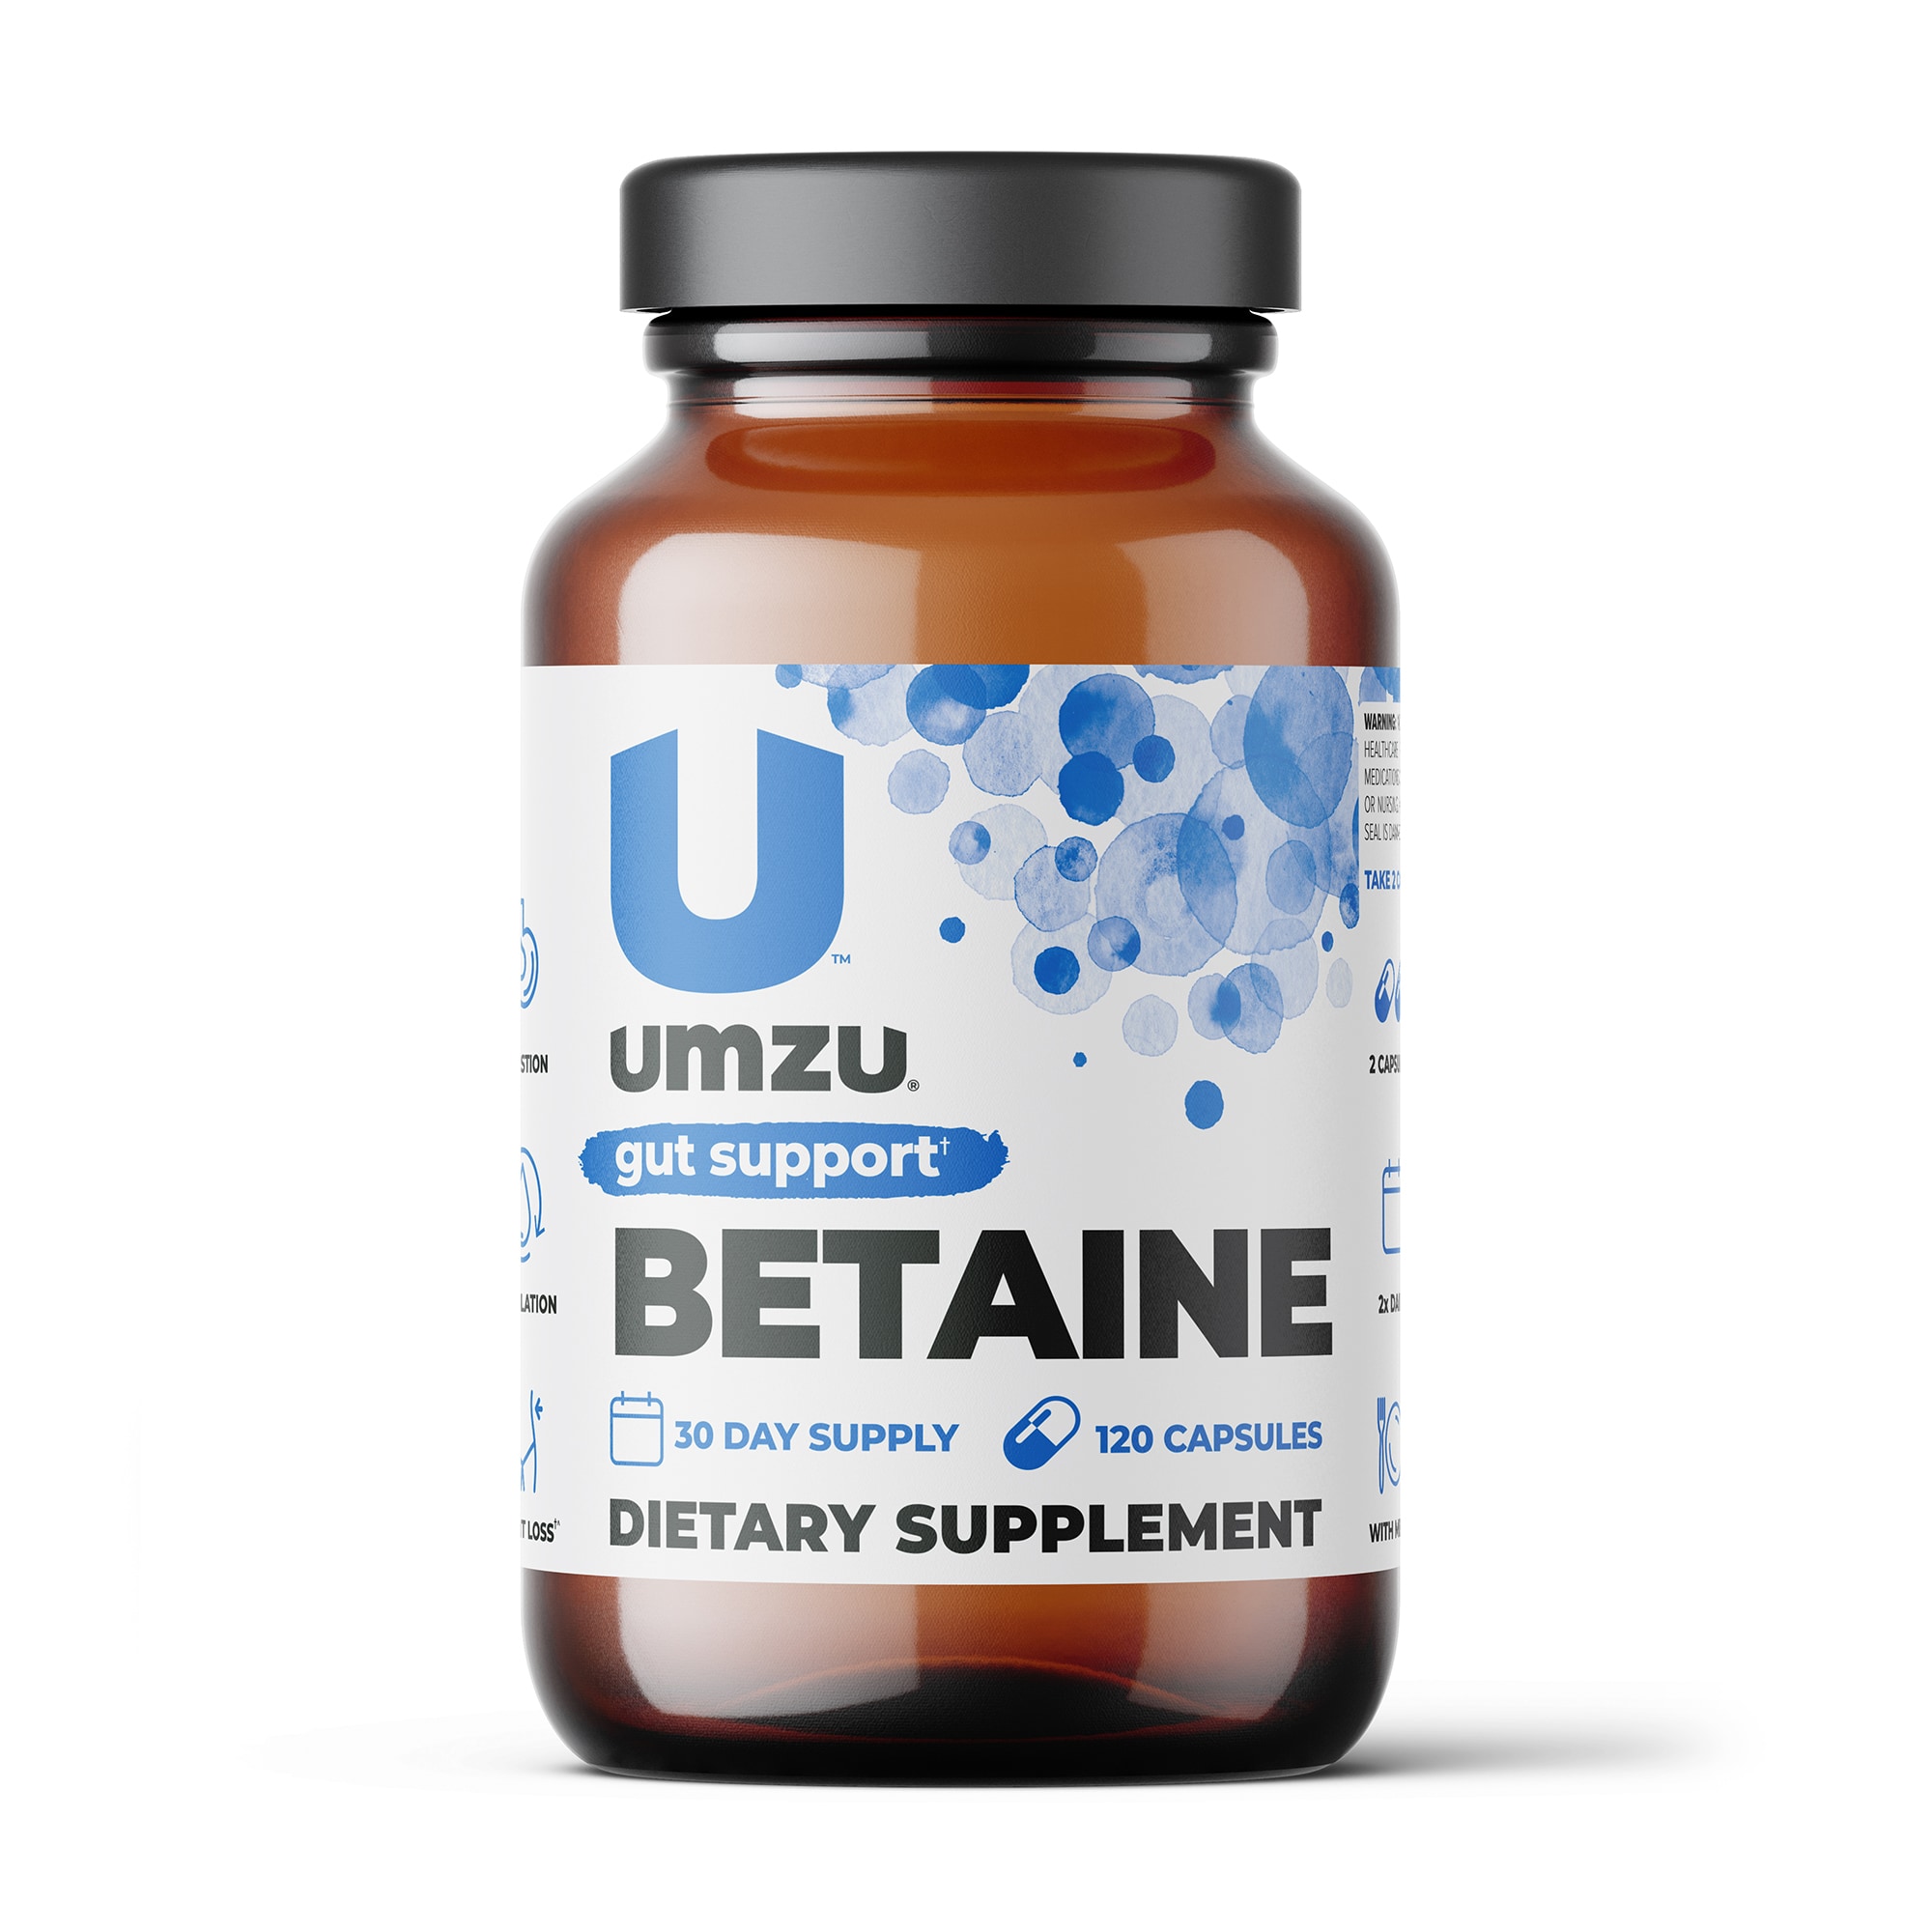 BETAINE HCl: Digestion & Circulatory Support